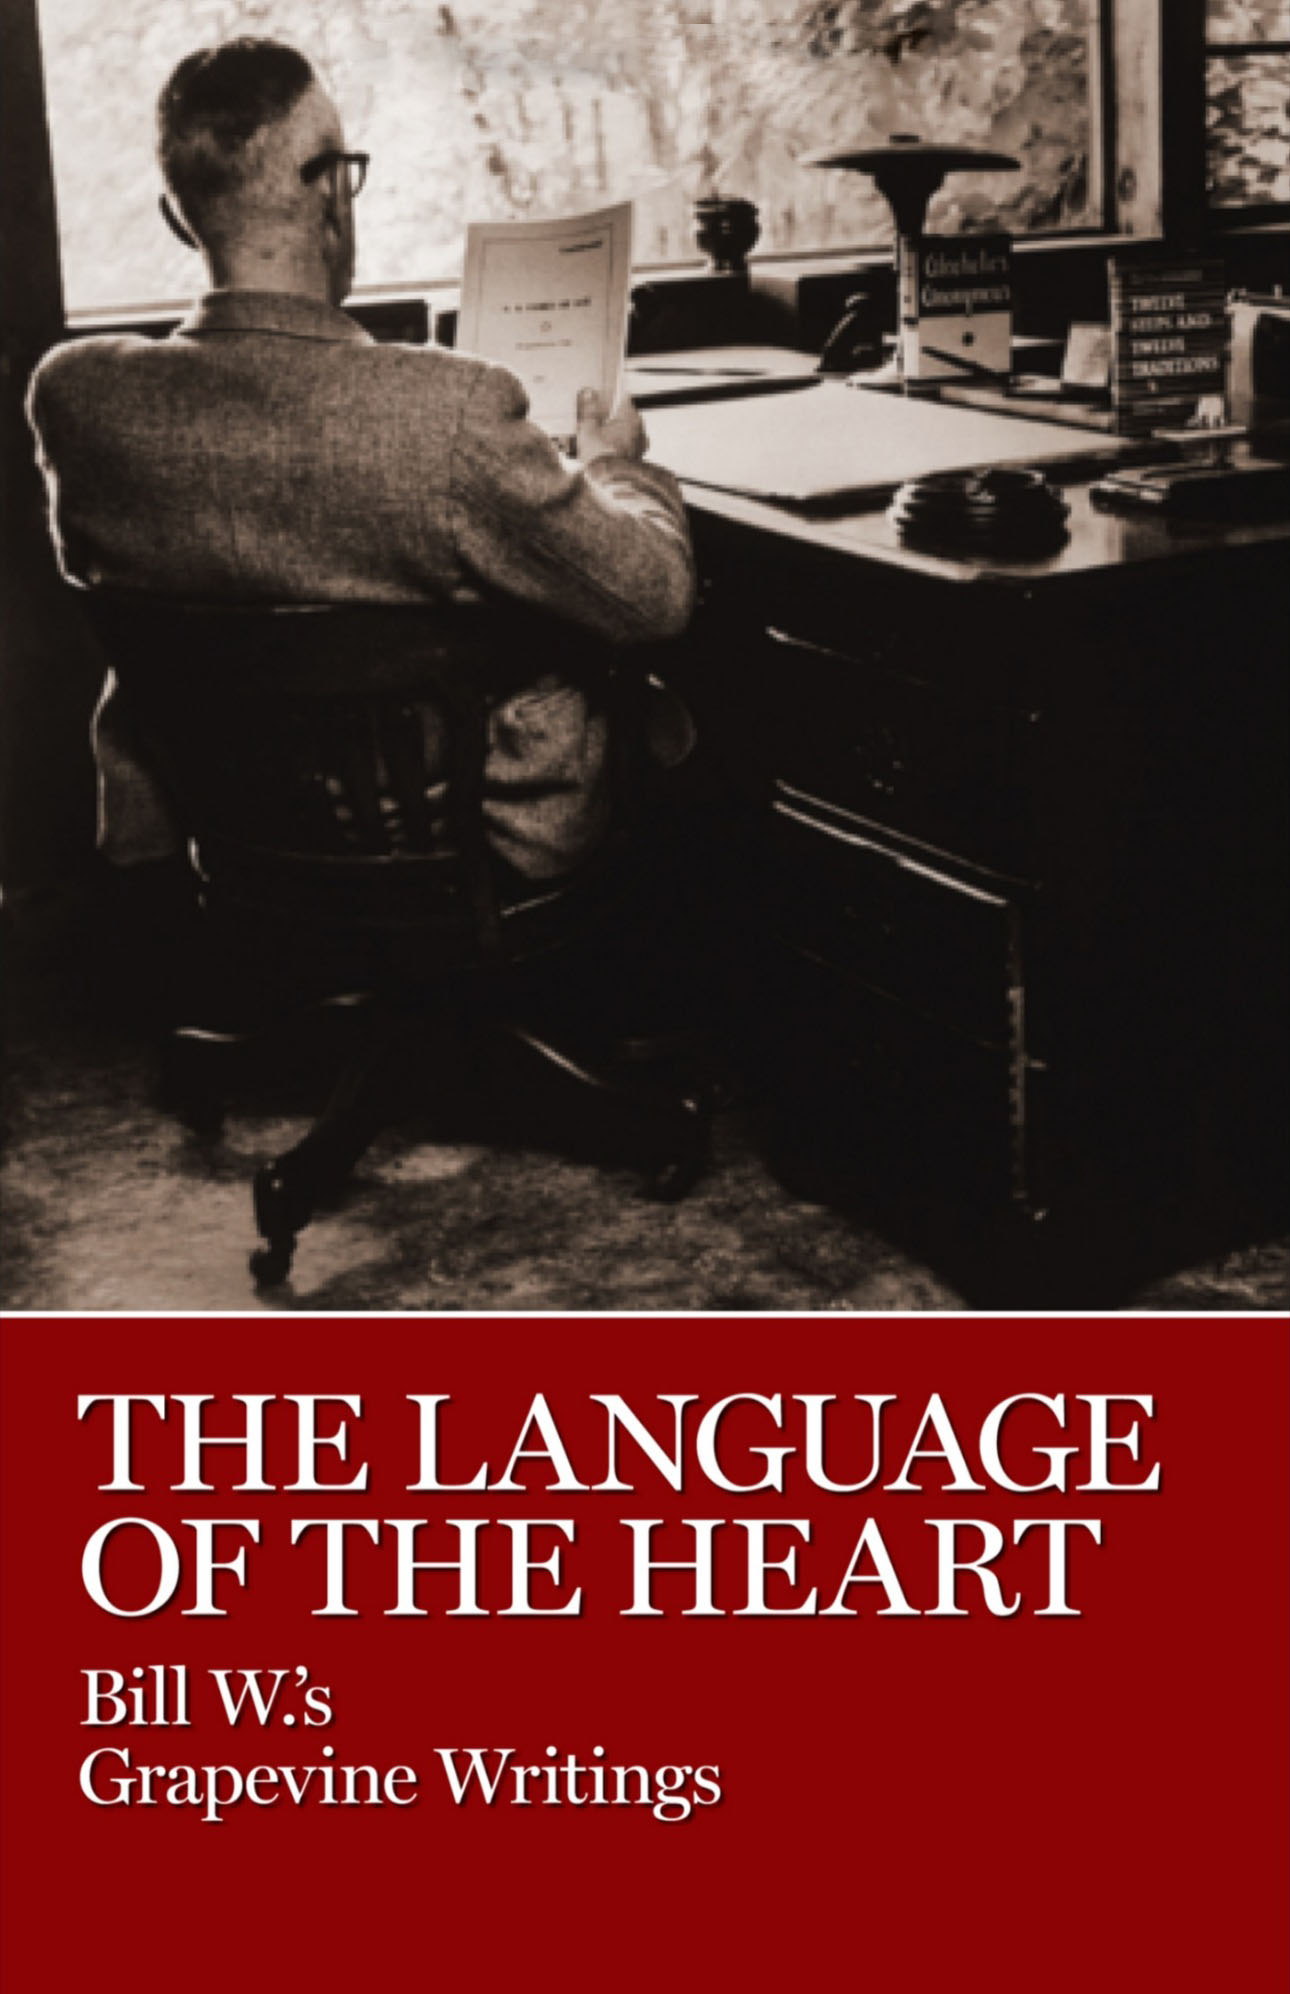 The Language of the Heart - Bill W